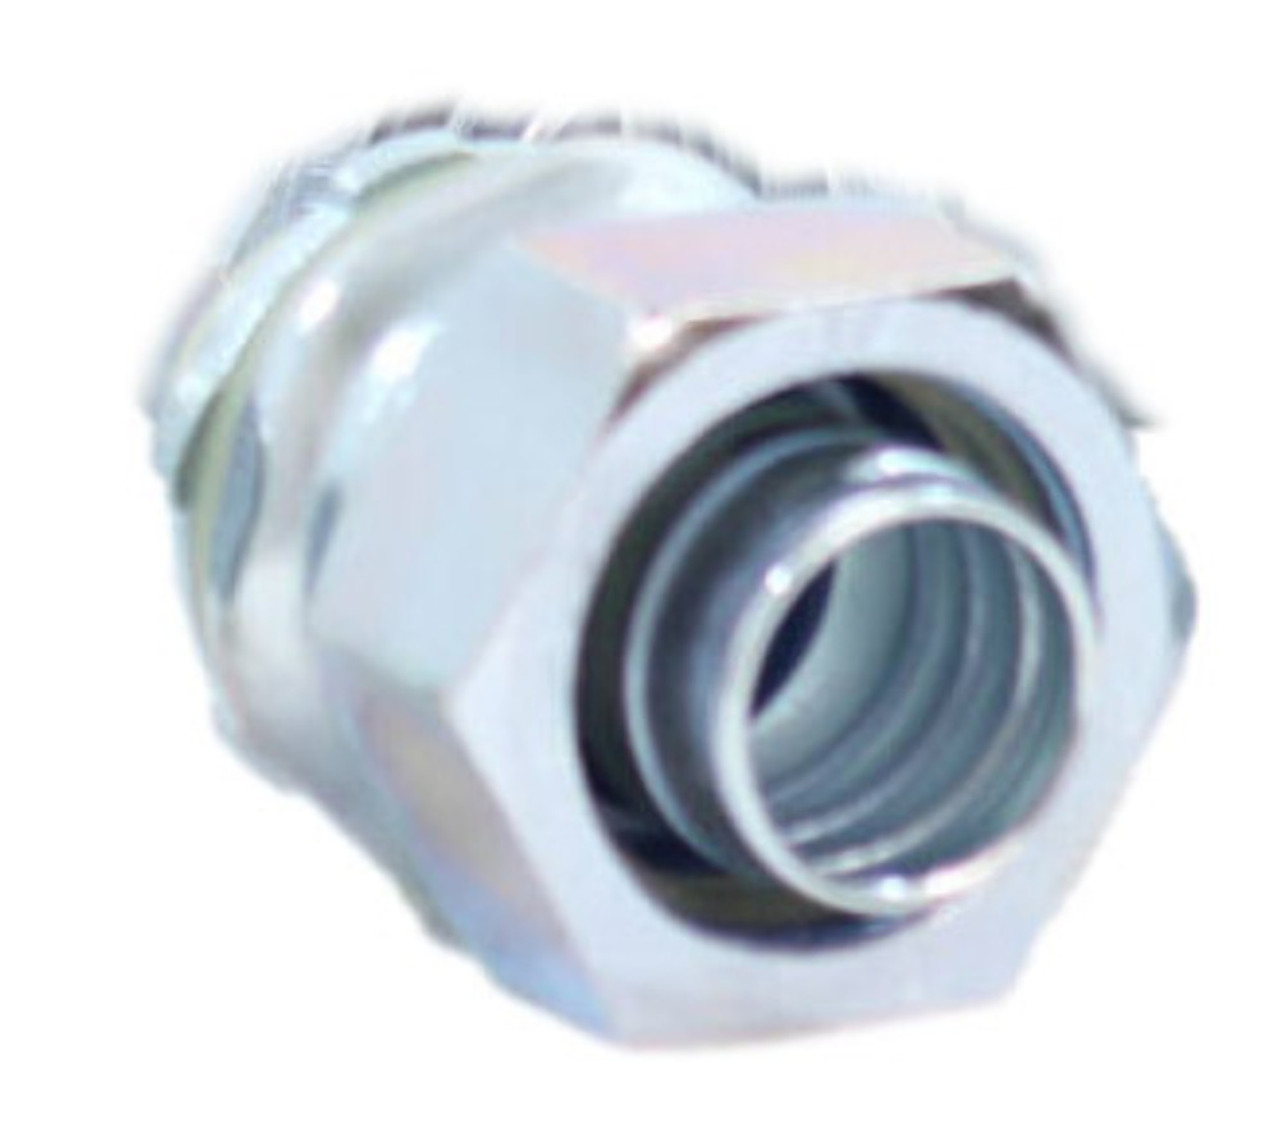 Emerson 4QS75T Straight Connector Material: Steel Size: 3/4 Inch Liquidtight, Zinc Plated, with Insulator